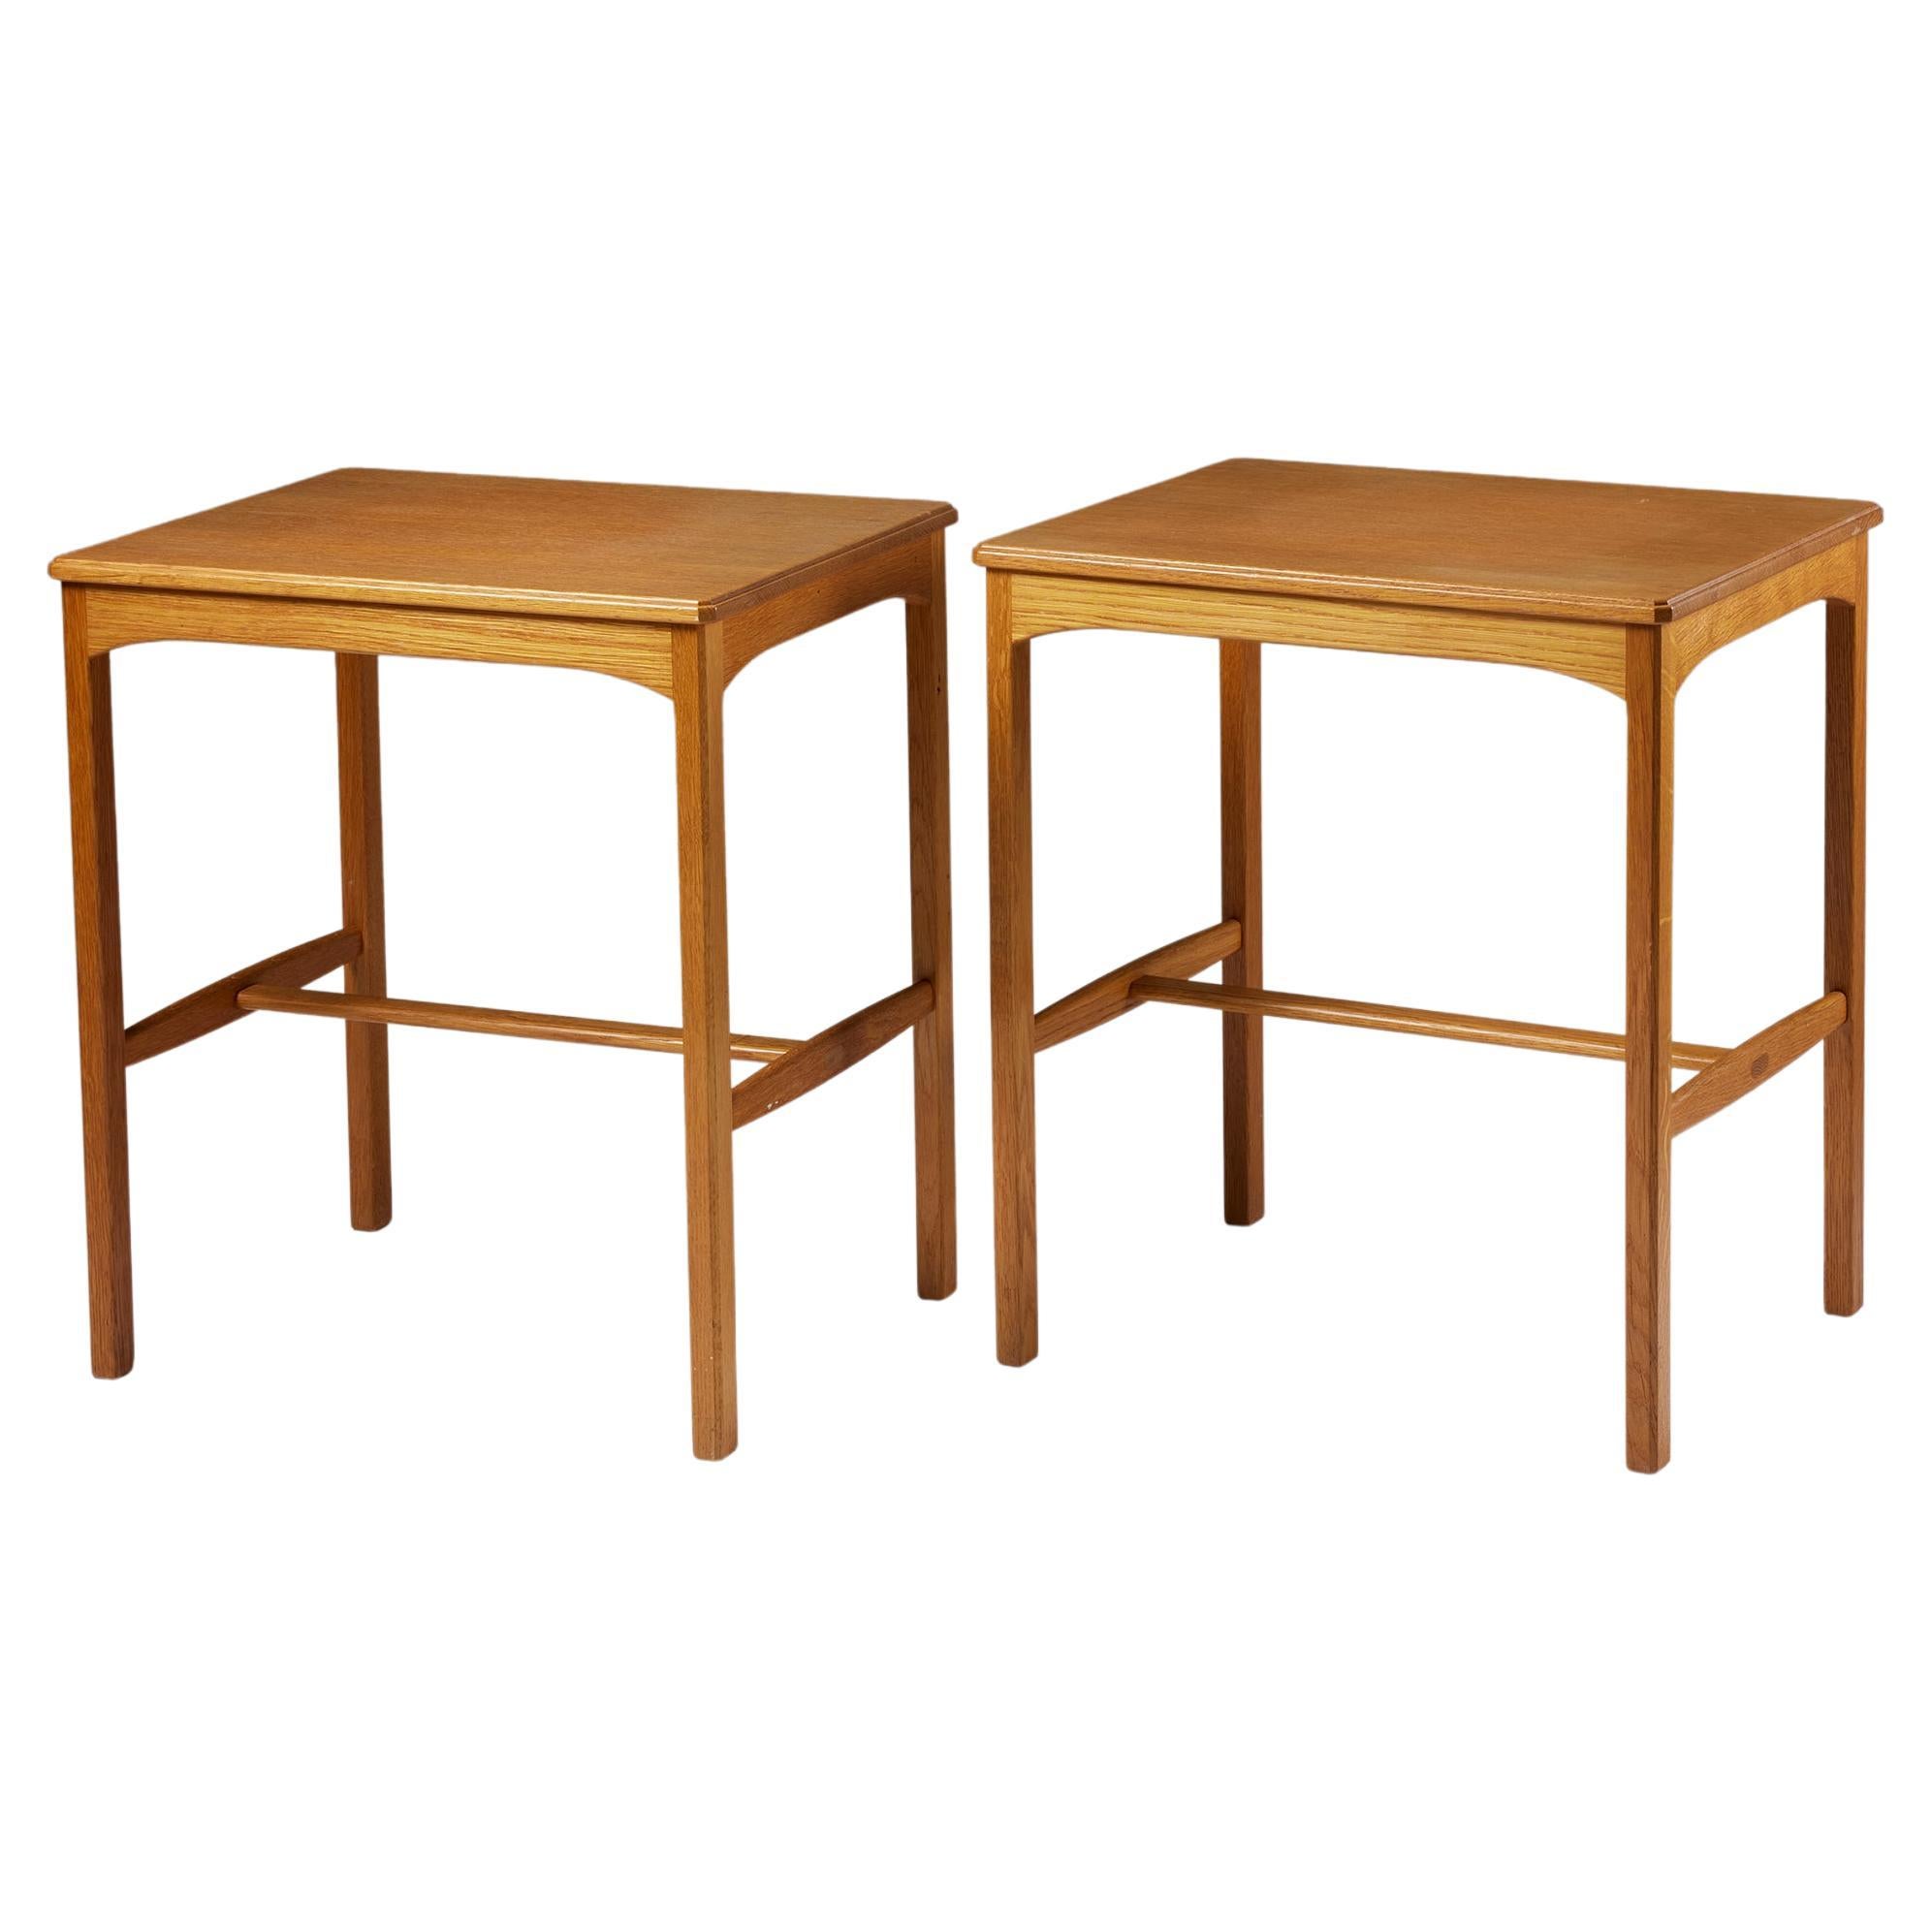 Pair of side tables ‘October’ designed by Carl Malmsten for Carl Löving & Sons